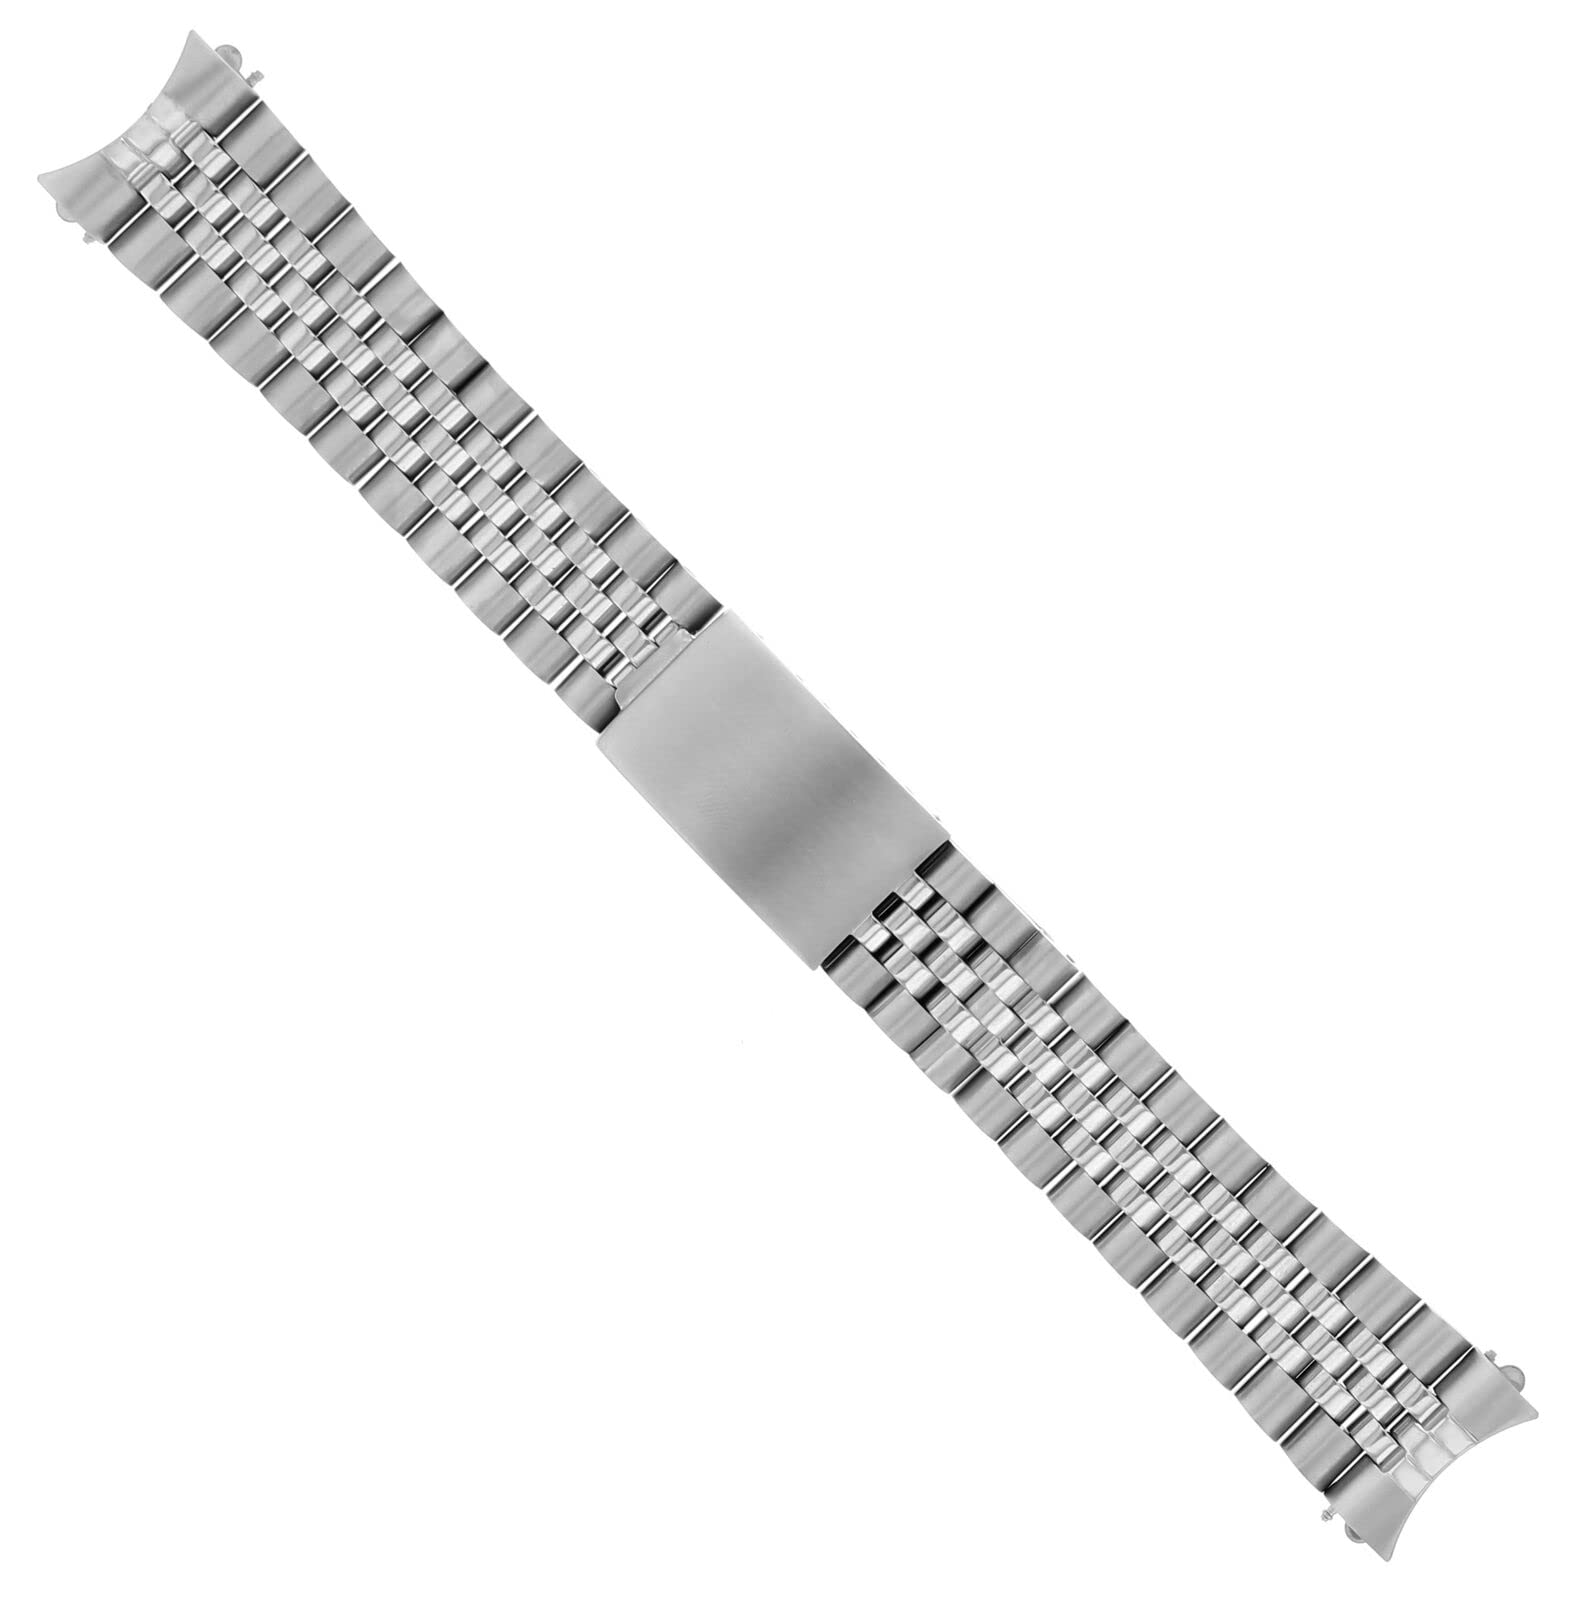 Ewatchparts 19MM JUBILEE WATCH BAND BRACELET FOR ROLEX AIR KING 1500, 5500 HEAVY STAINLESS